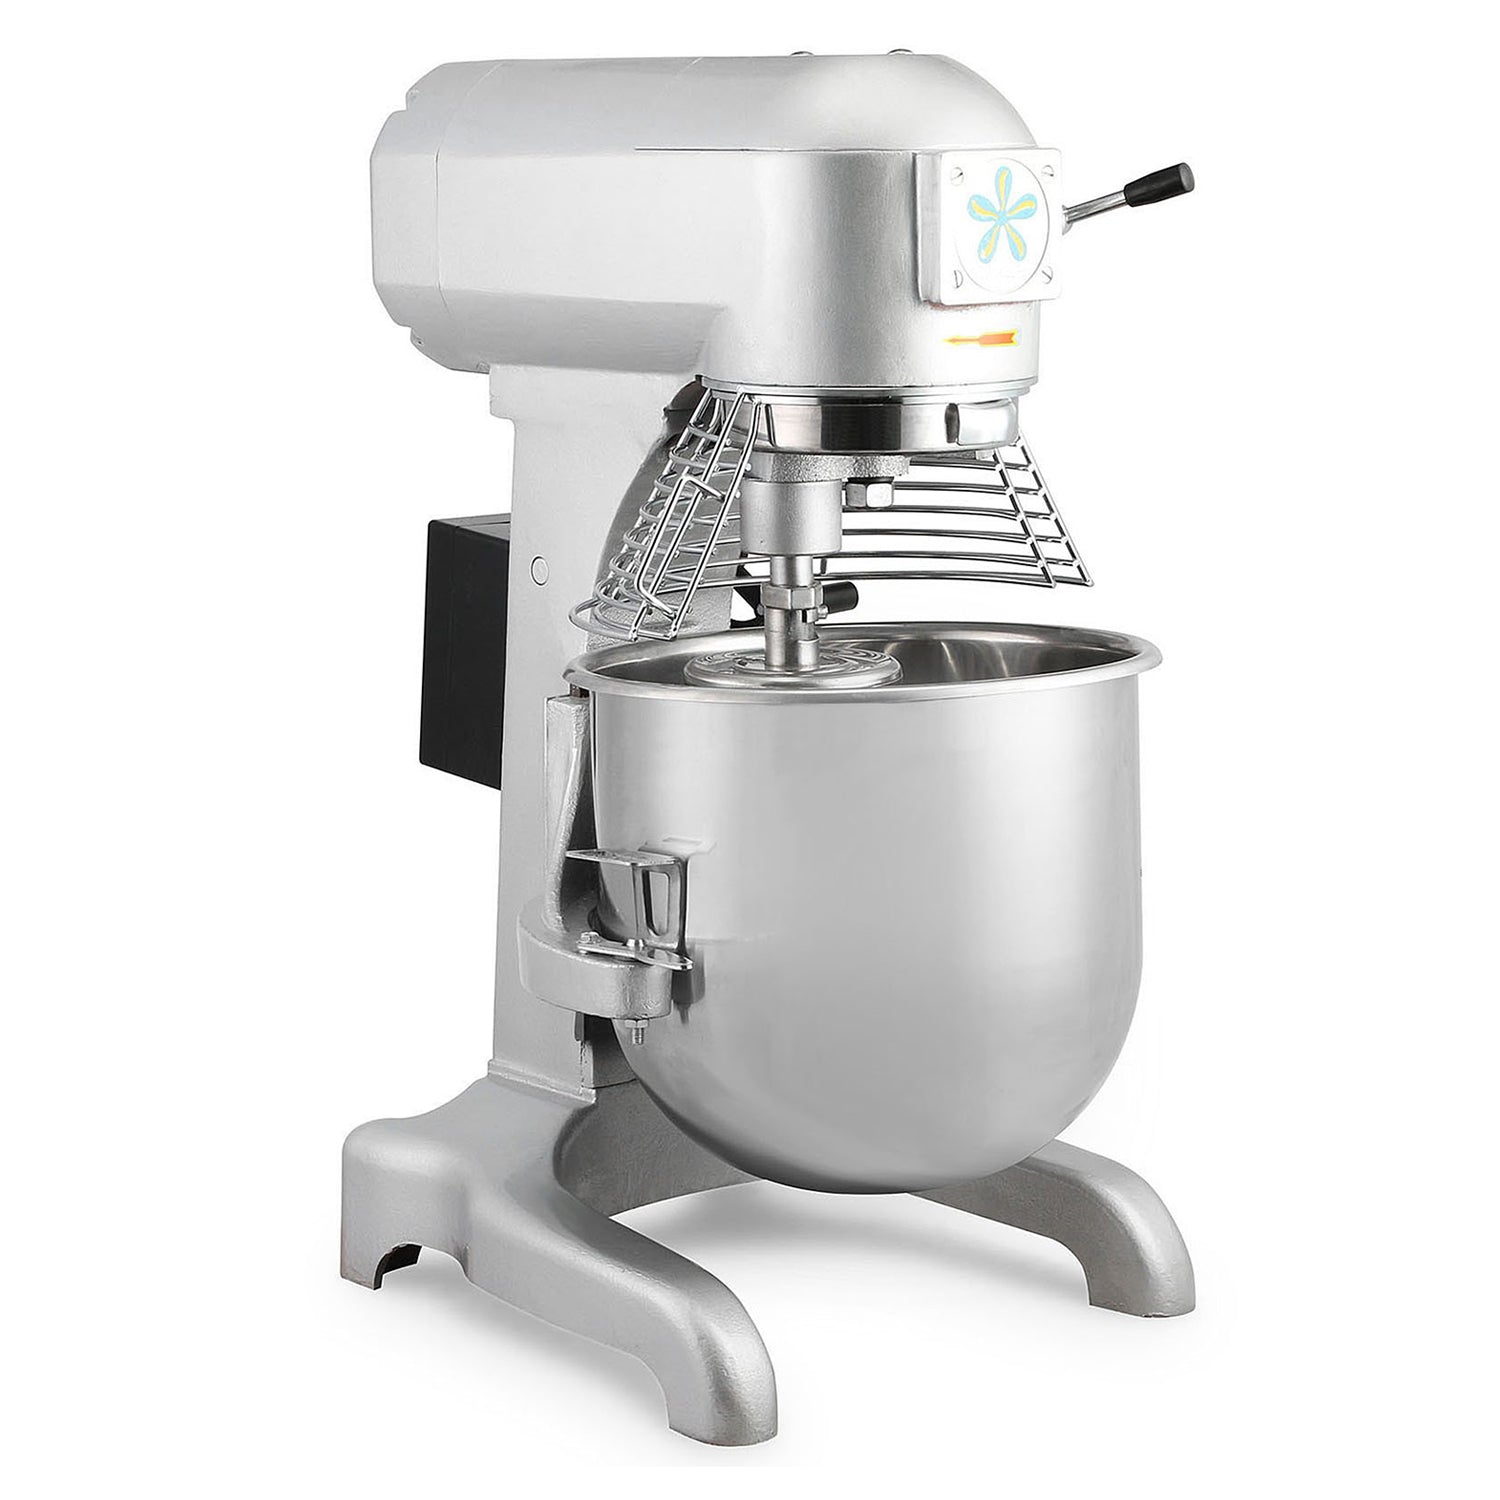 GR-20QT Food Mixer | Commercial Planetary Mixer with Dough Hook, Wire Whip & Beater | 20QT